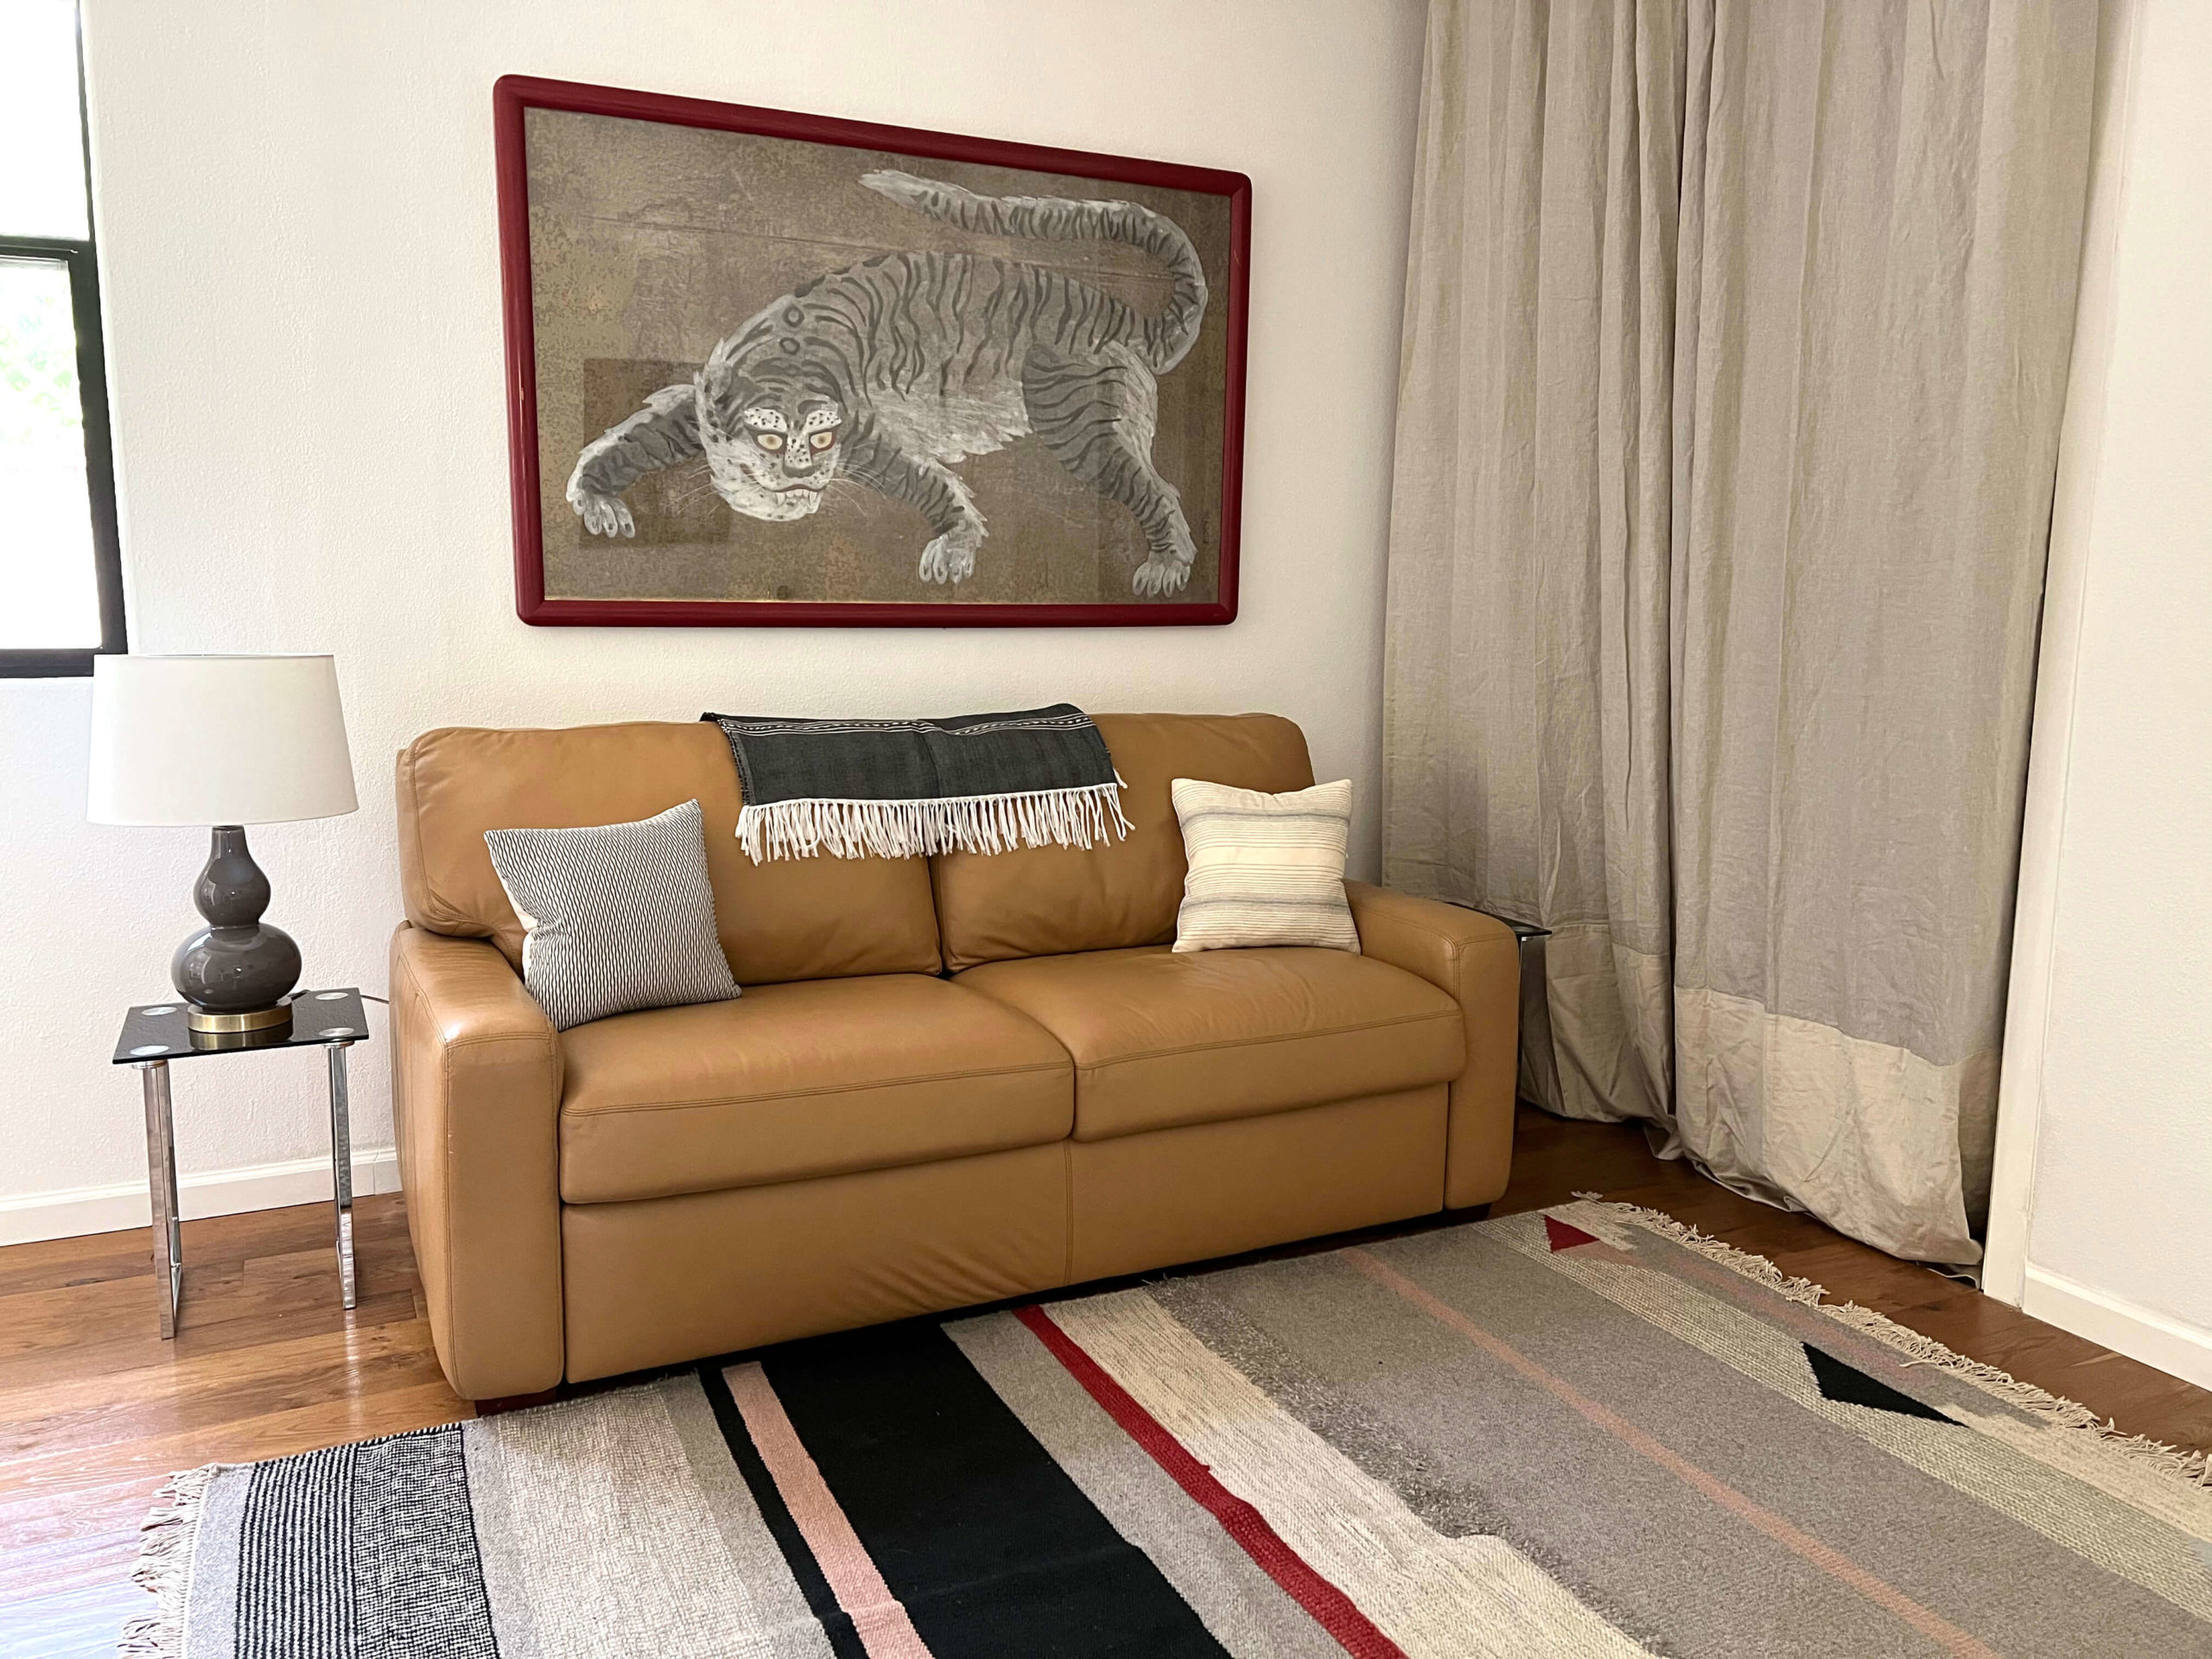 Fold-out leather couch in living/bedroom of Bouldin Creek Airbnb in South Austin, Texas, tiger red framed art hanging, red and grey striped rug